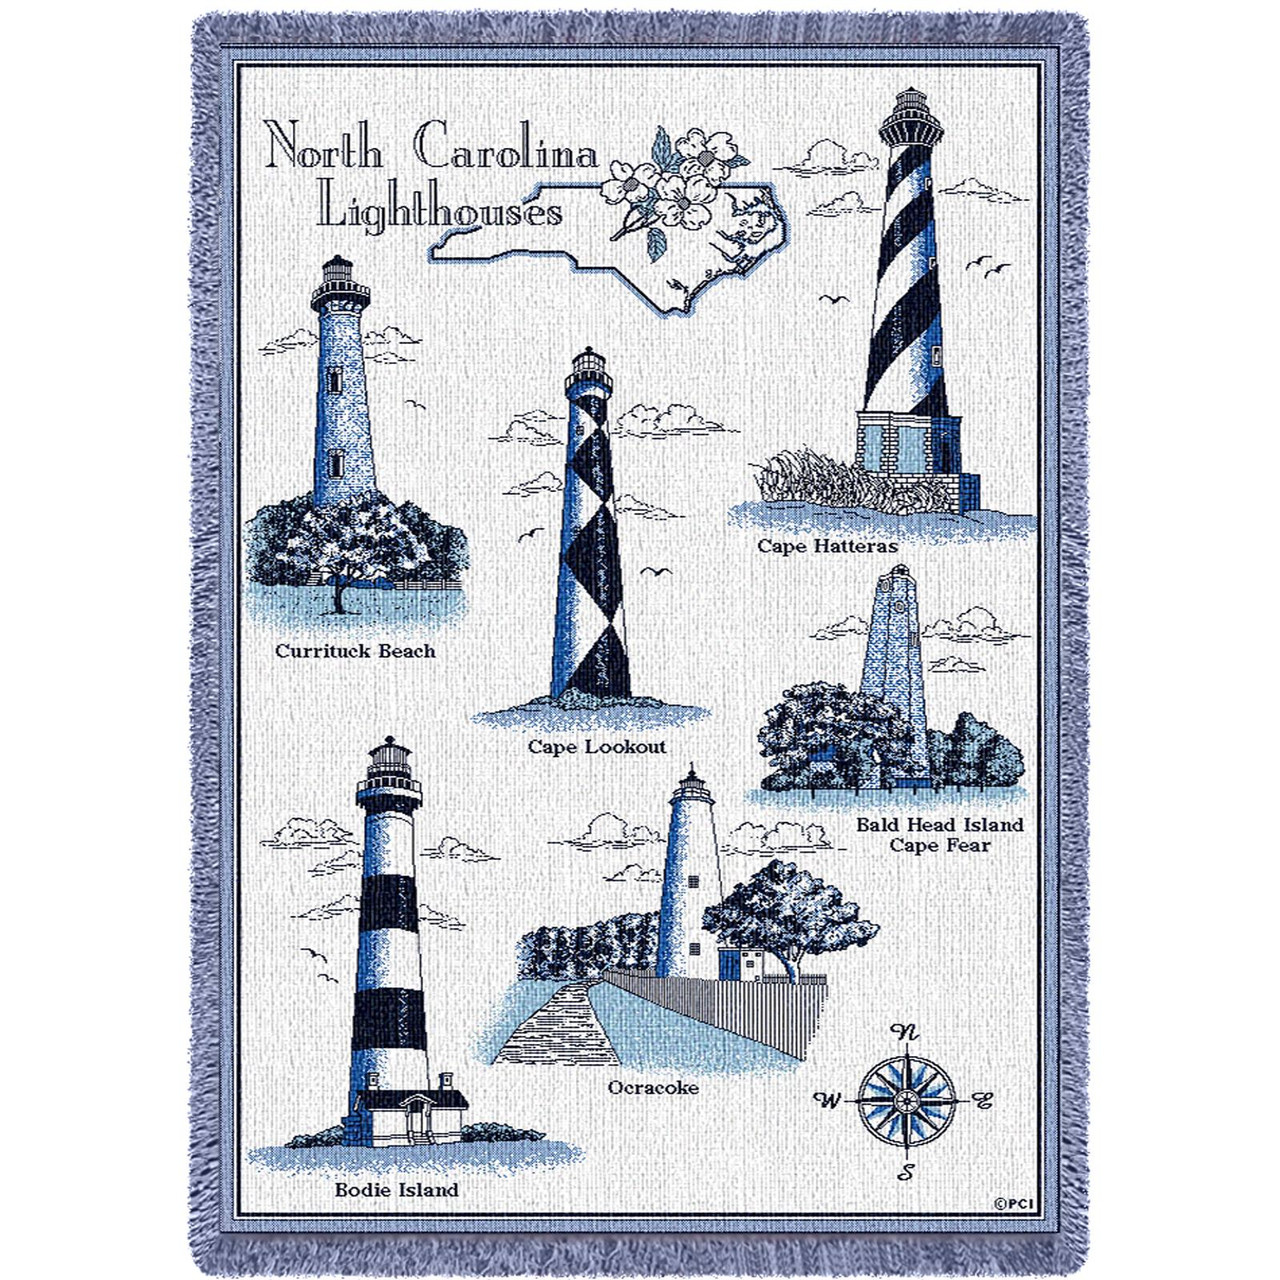 North Carolina Lighthouses Hatteras & 3 More Tapestry Pillow New Lighthouses 